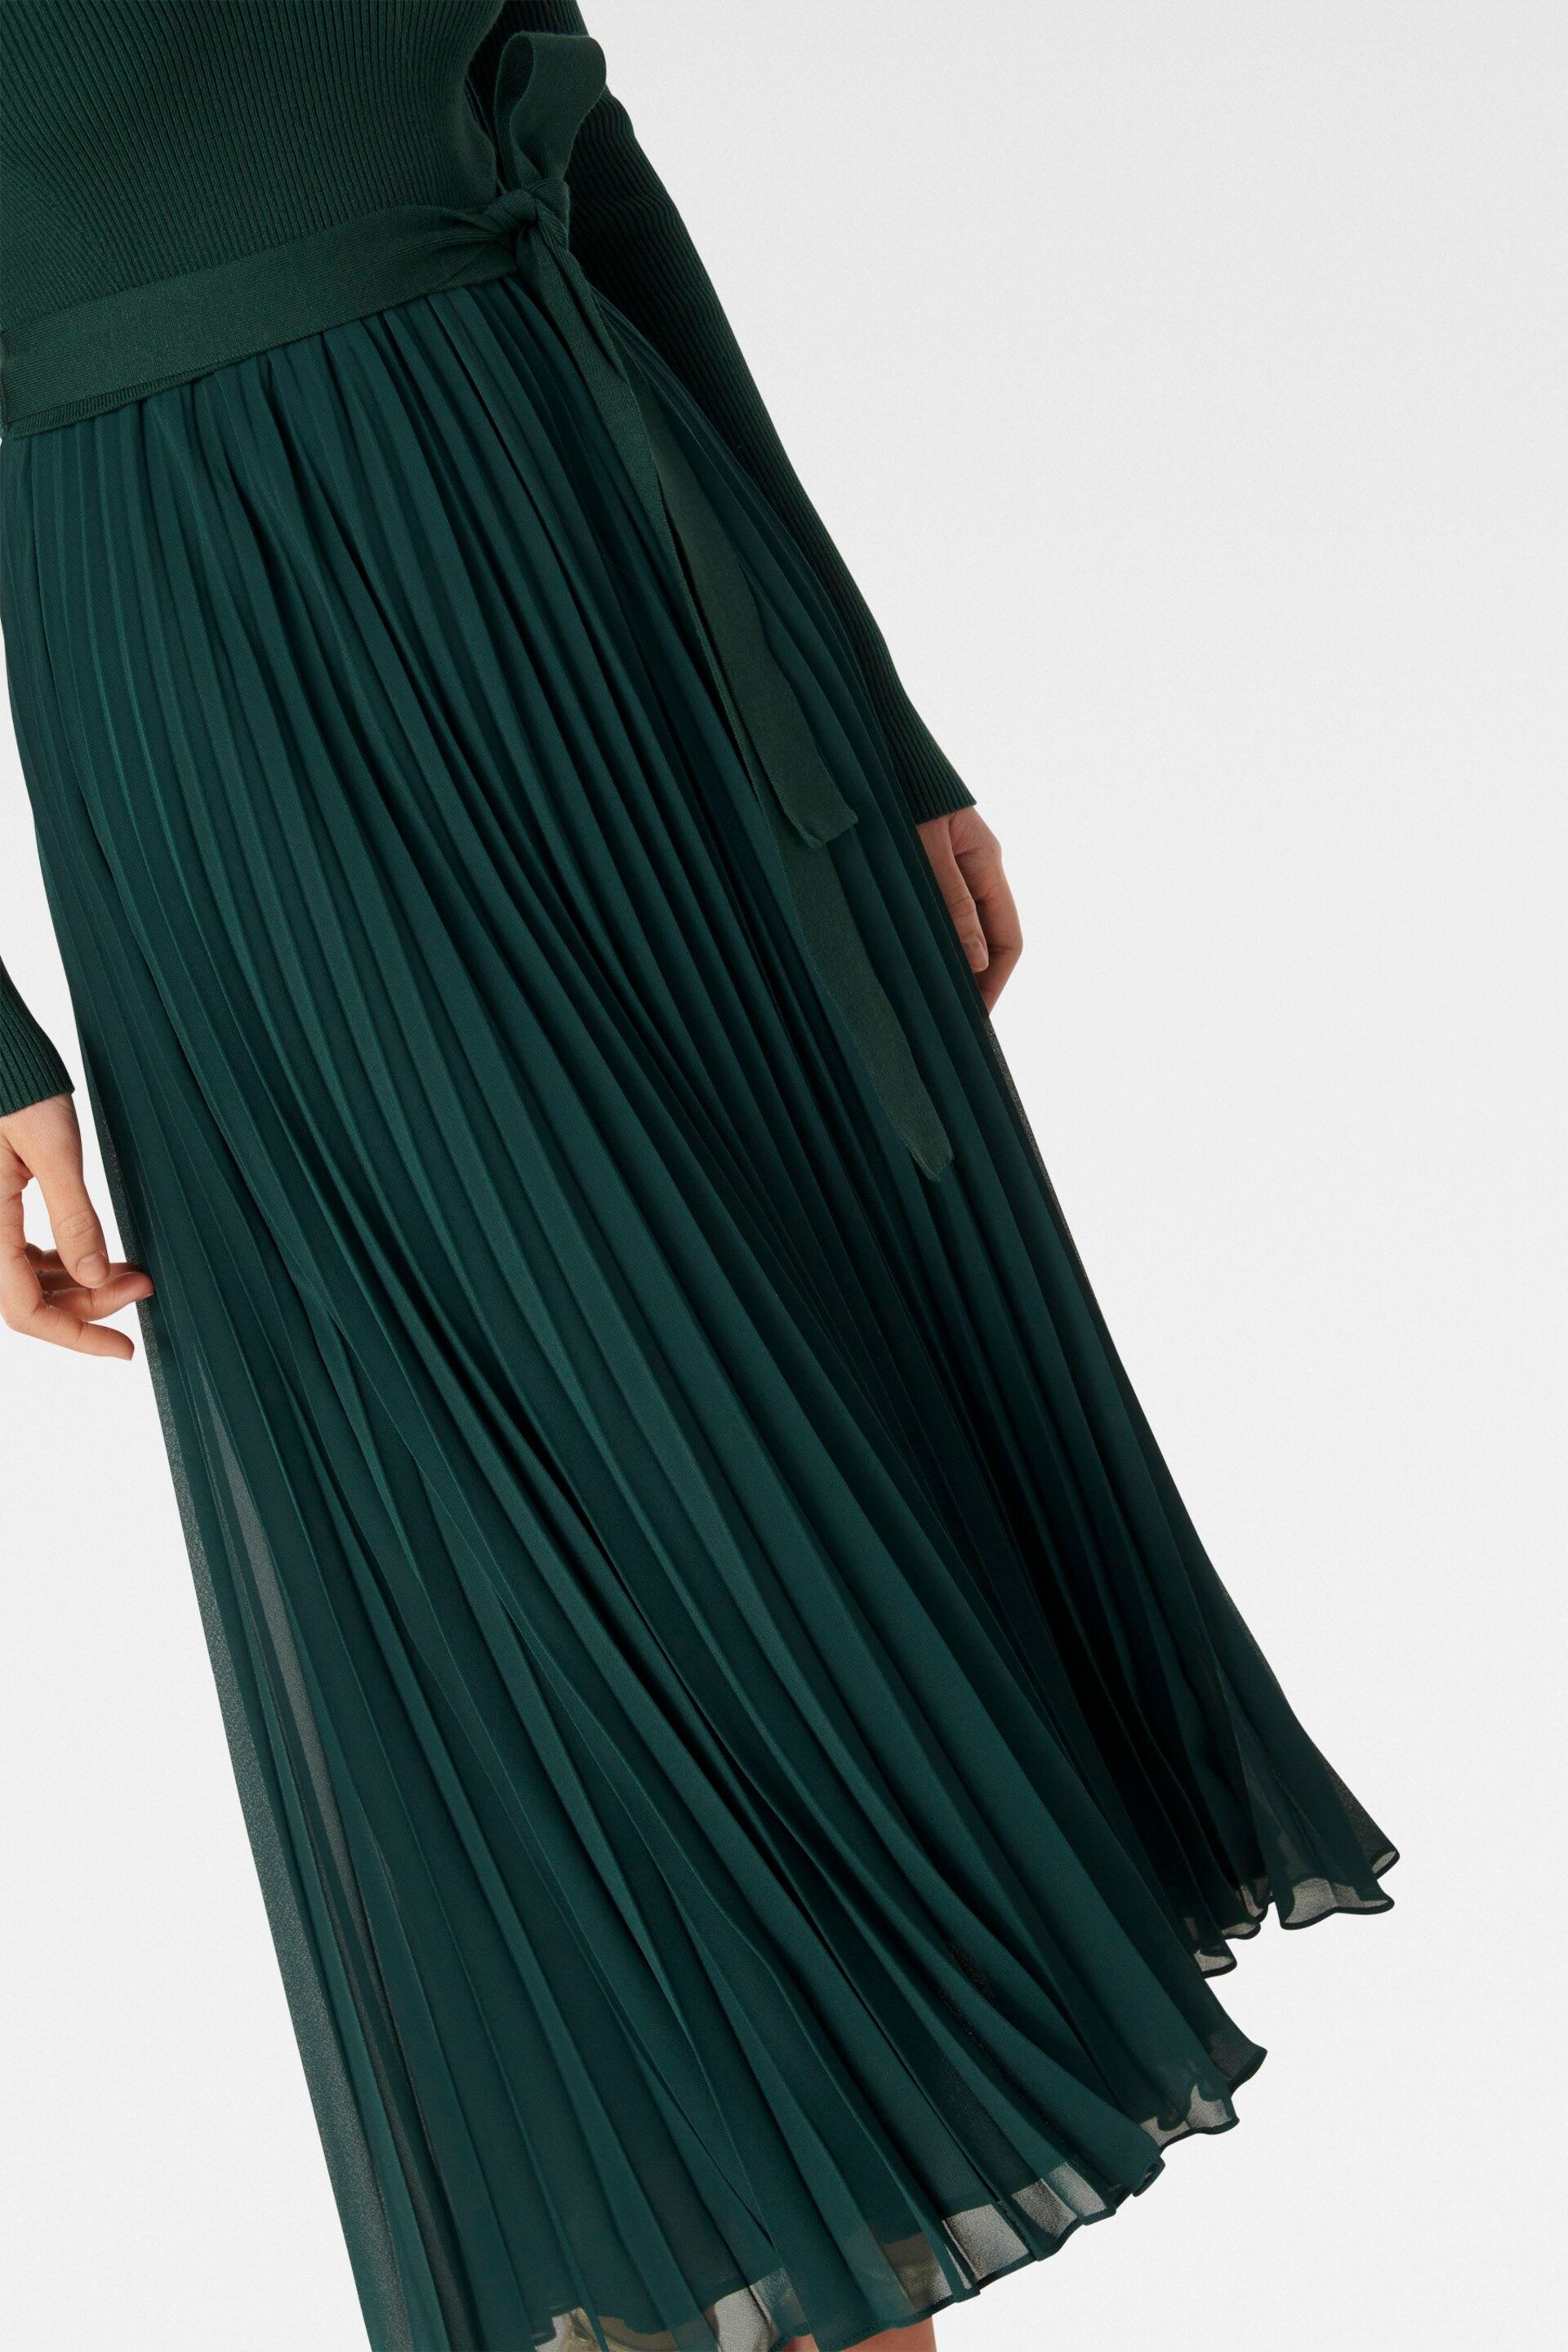 Forever New Green Posey Woven Mix Knit Dress - Image 4 of 4